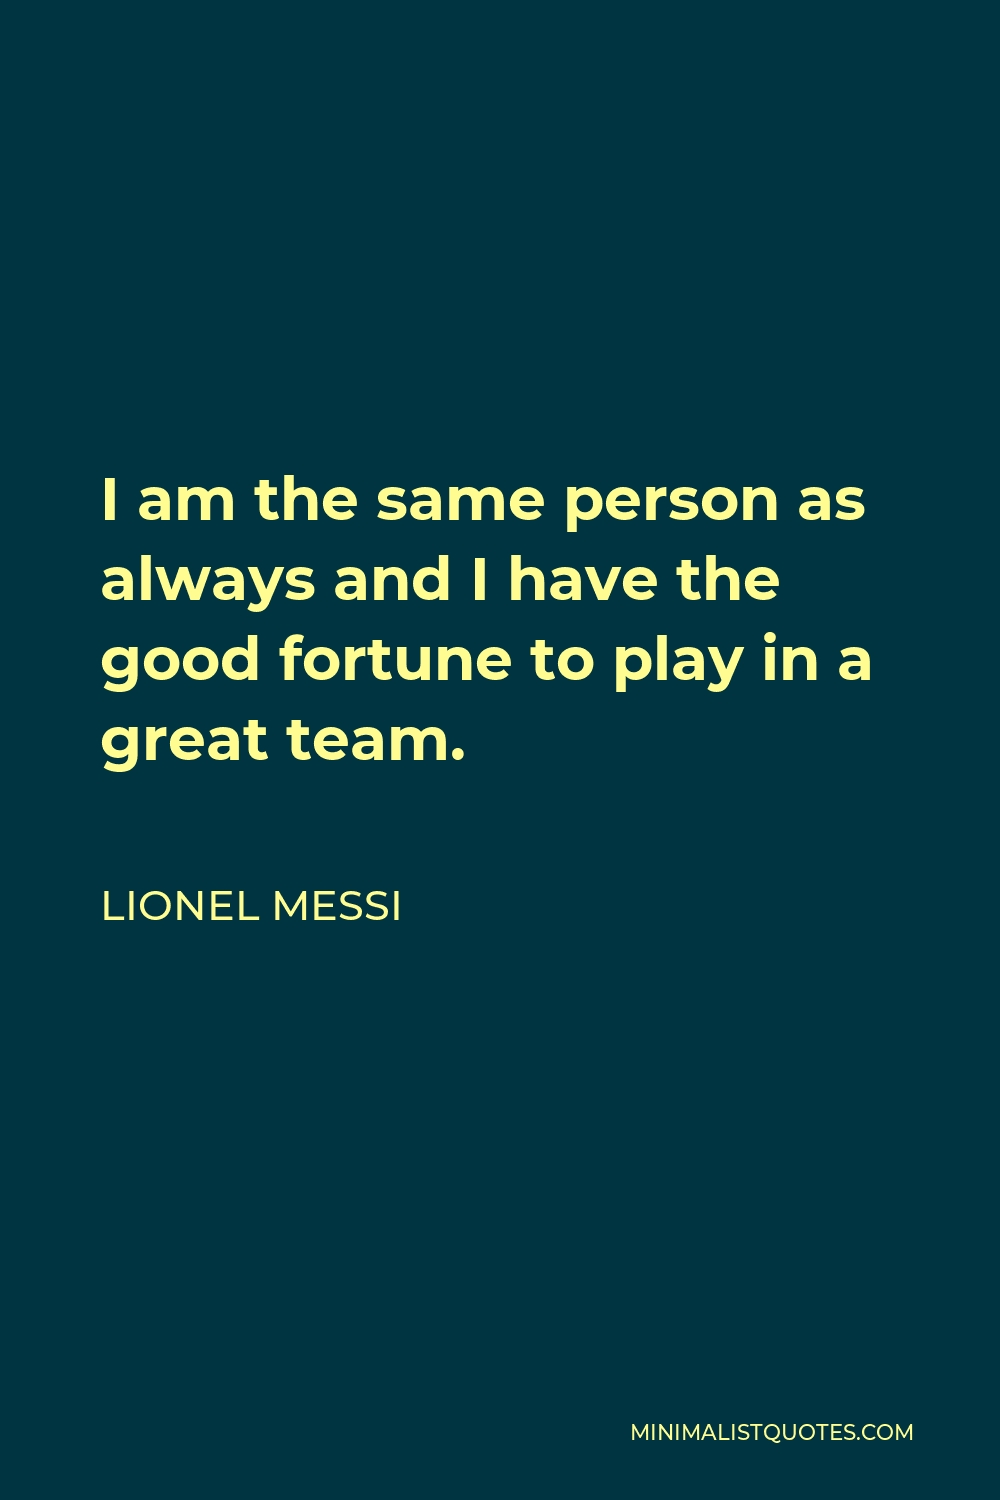 Lionel Messi Quote - I am the same person as always and I have the good fortune to play in a great team.